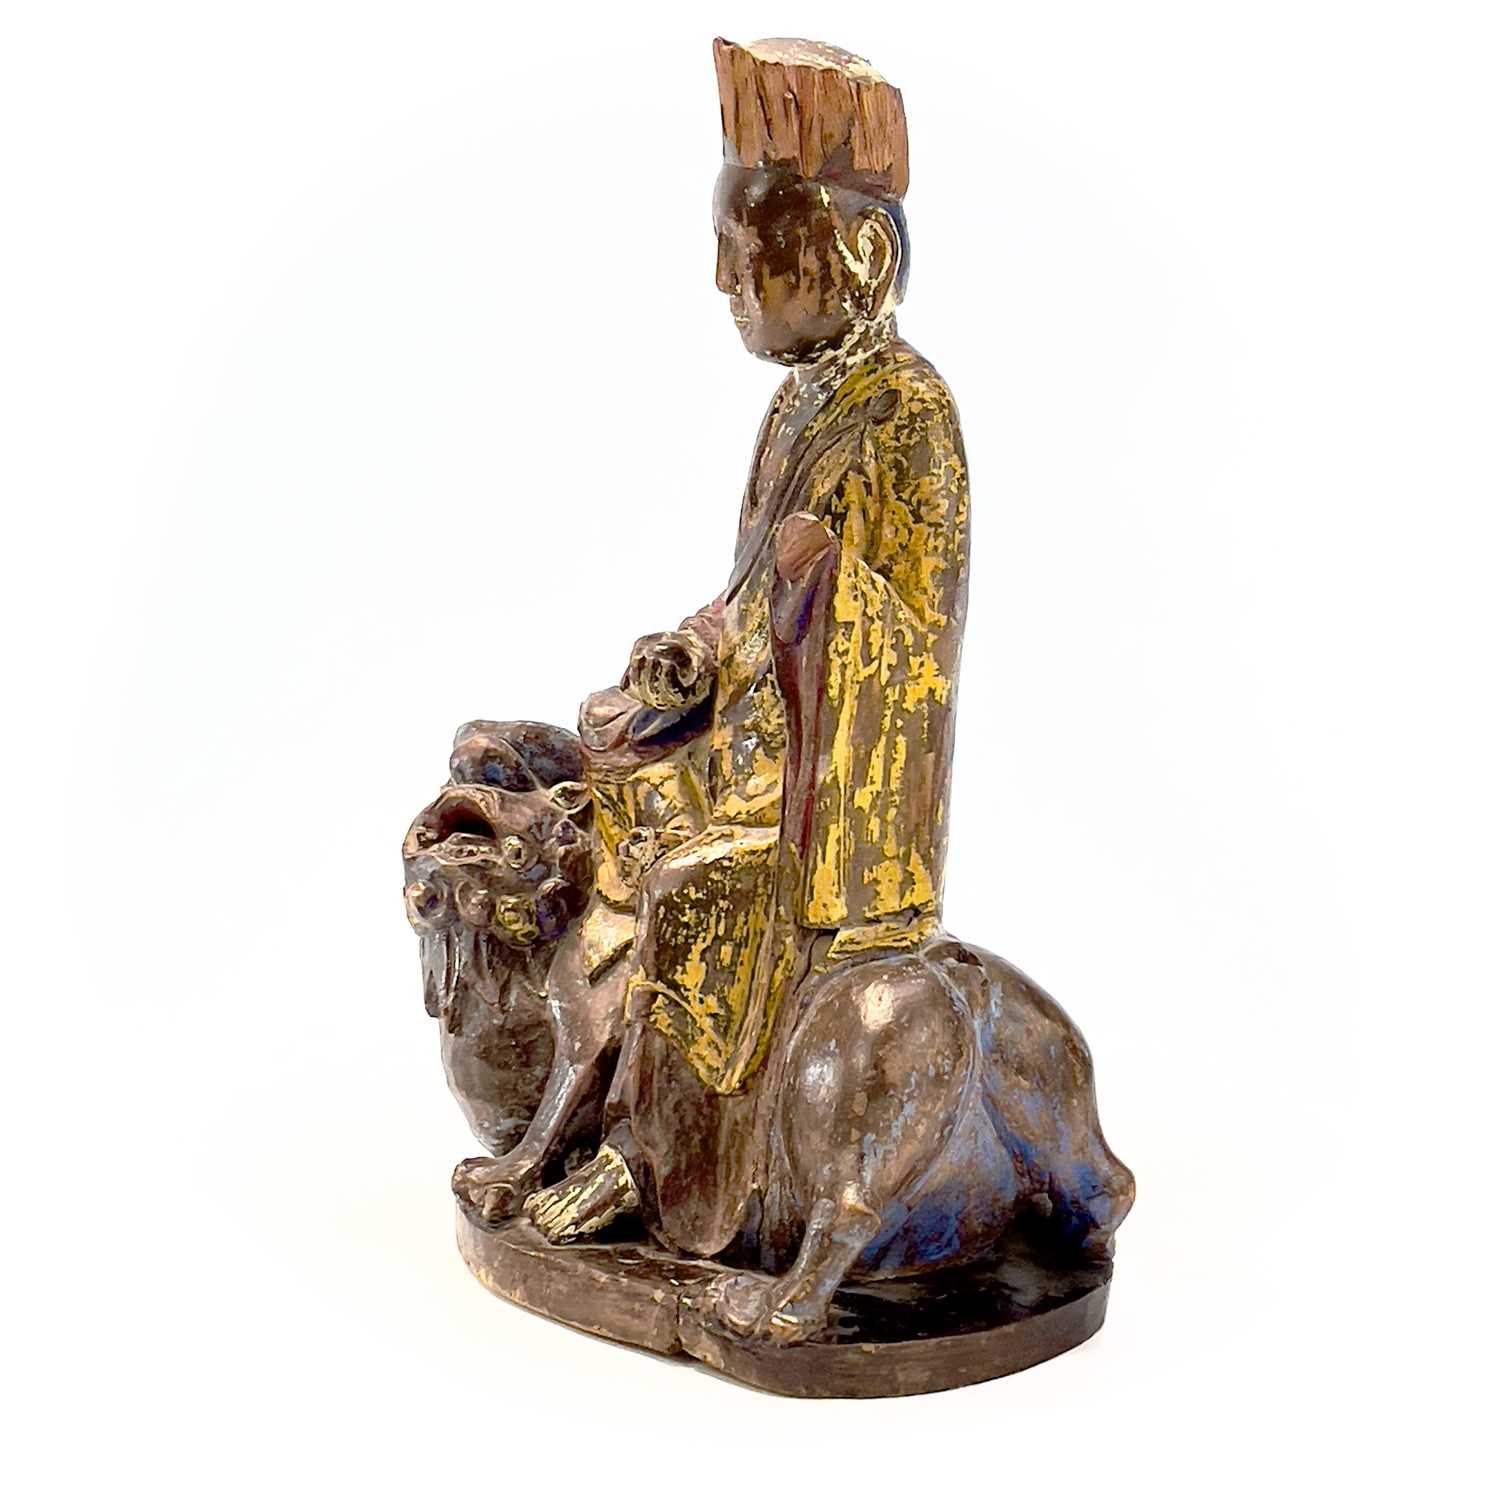 A Chinese carved and painted figure, 19th century, seated in robes wearing a high crown and riding a - Image 3 of 11